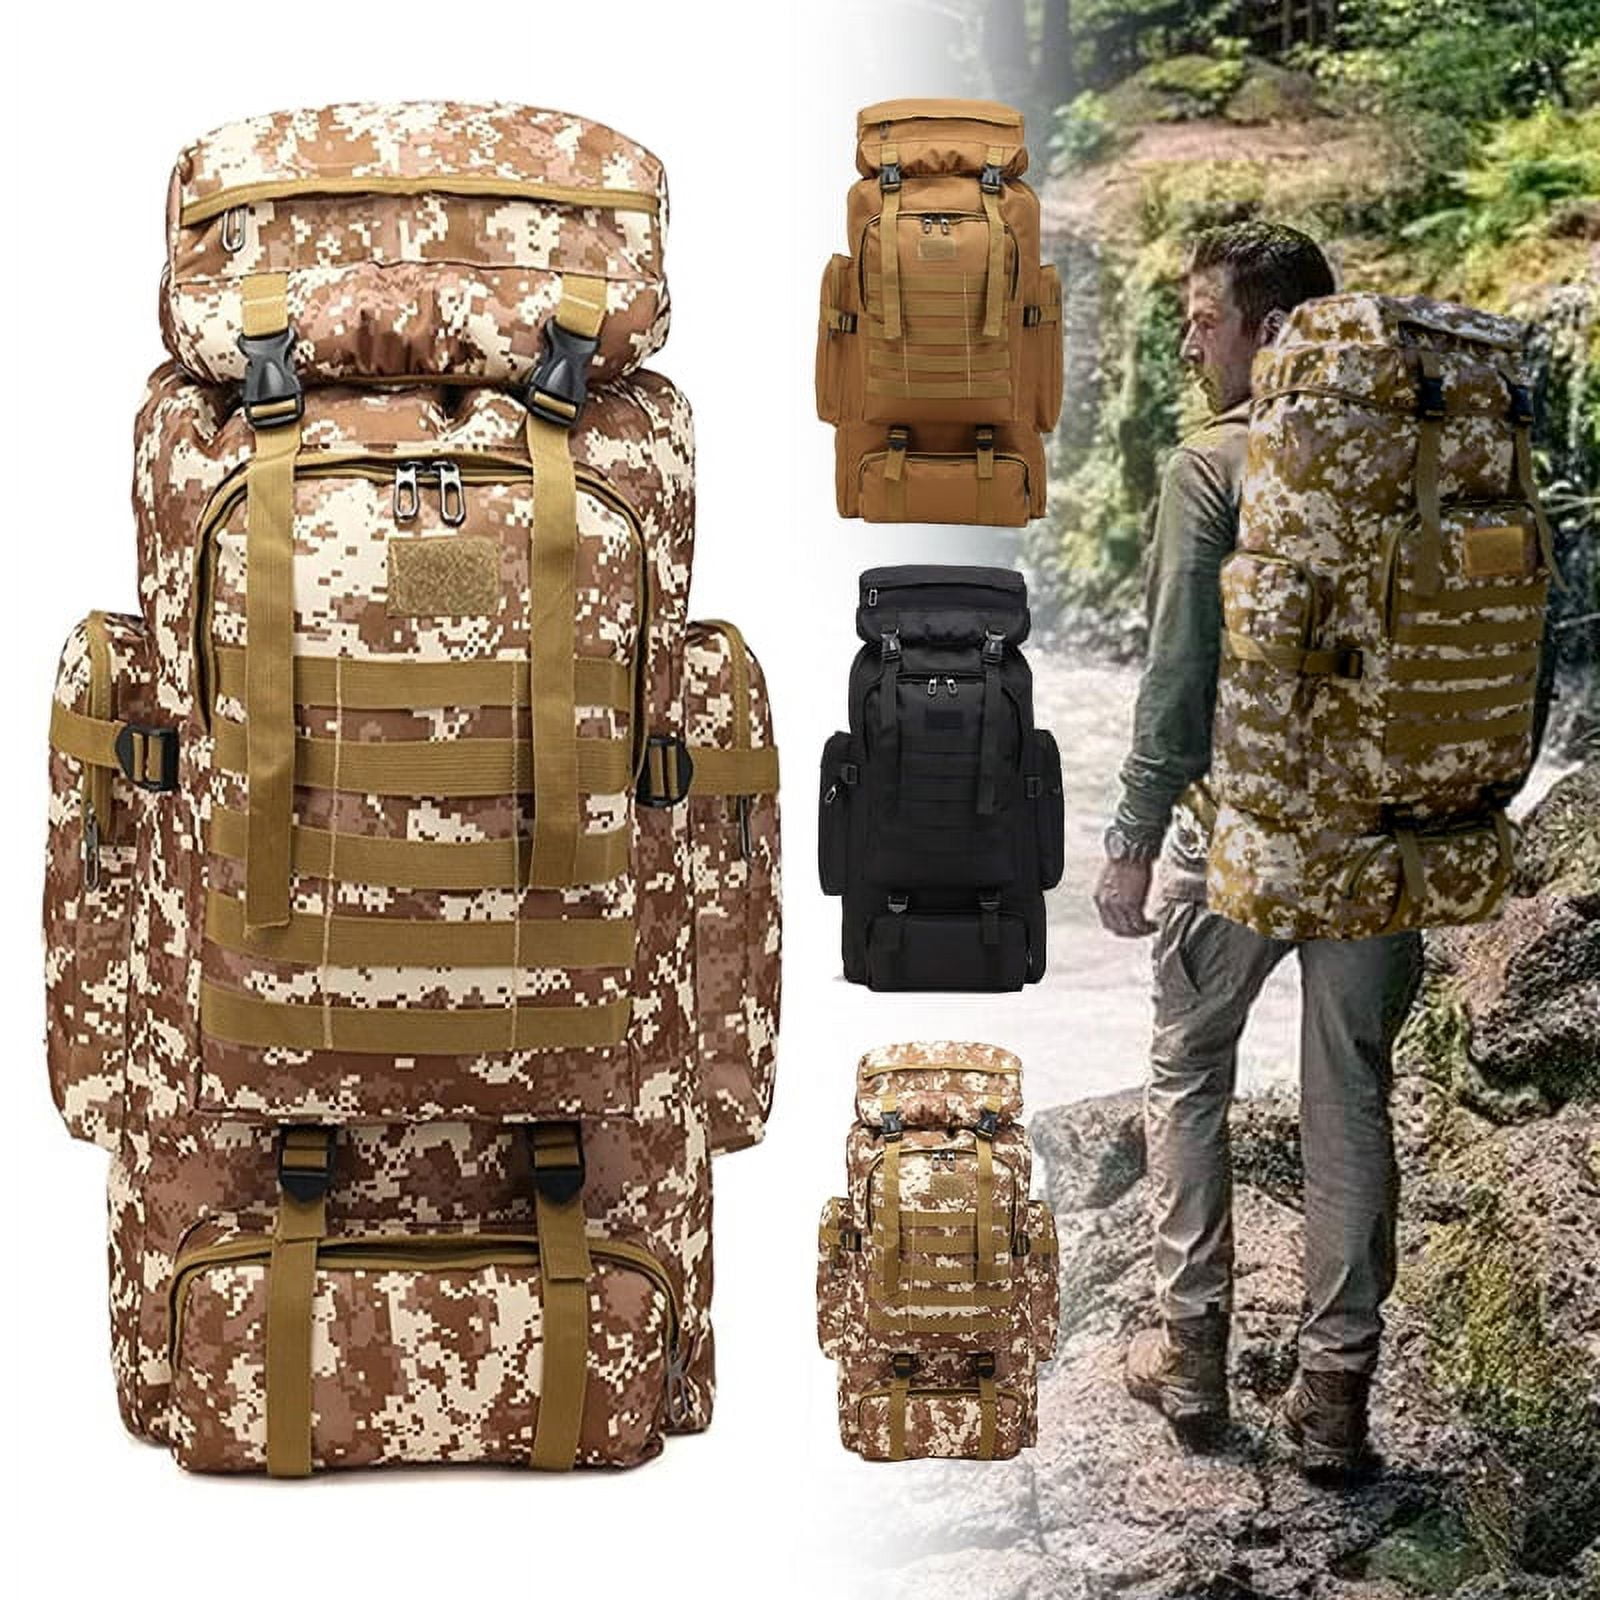 EISHOW 80L Outdoor Hiking Backpack, Large Capacity Waterproof Assault Pack  Tactical Bag Molle Military Rucksack (Beige)